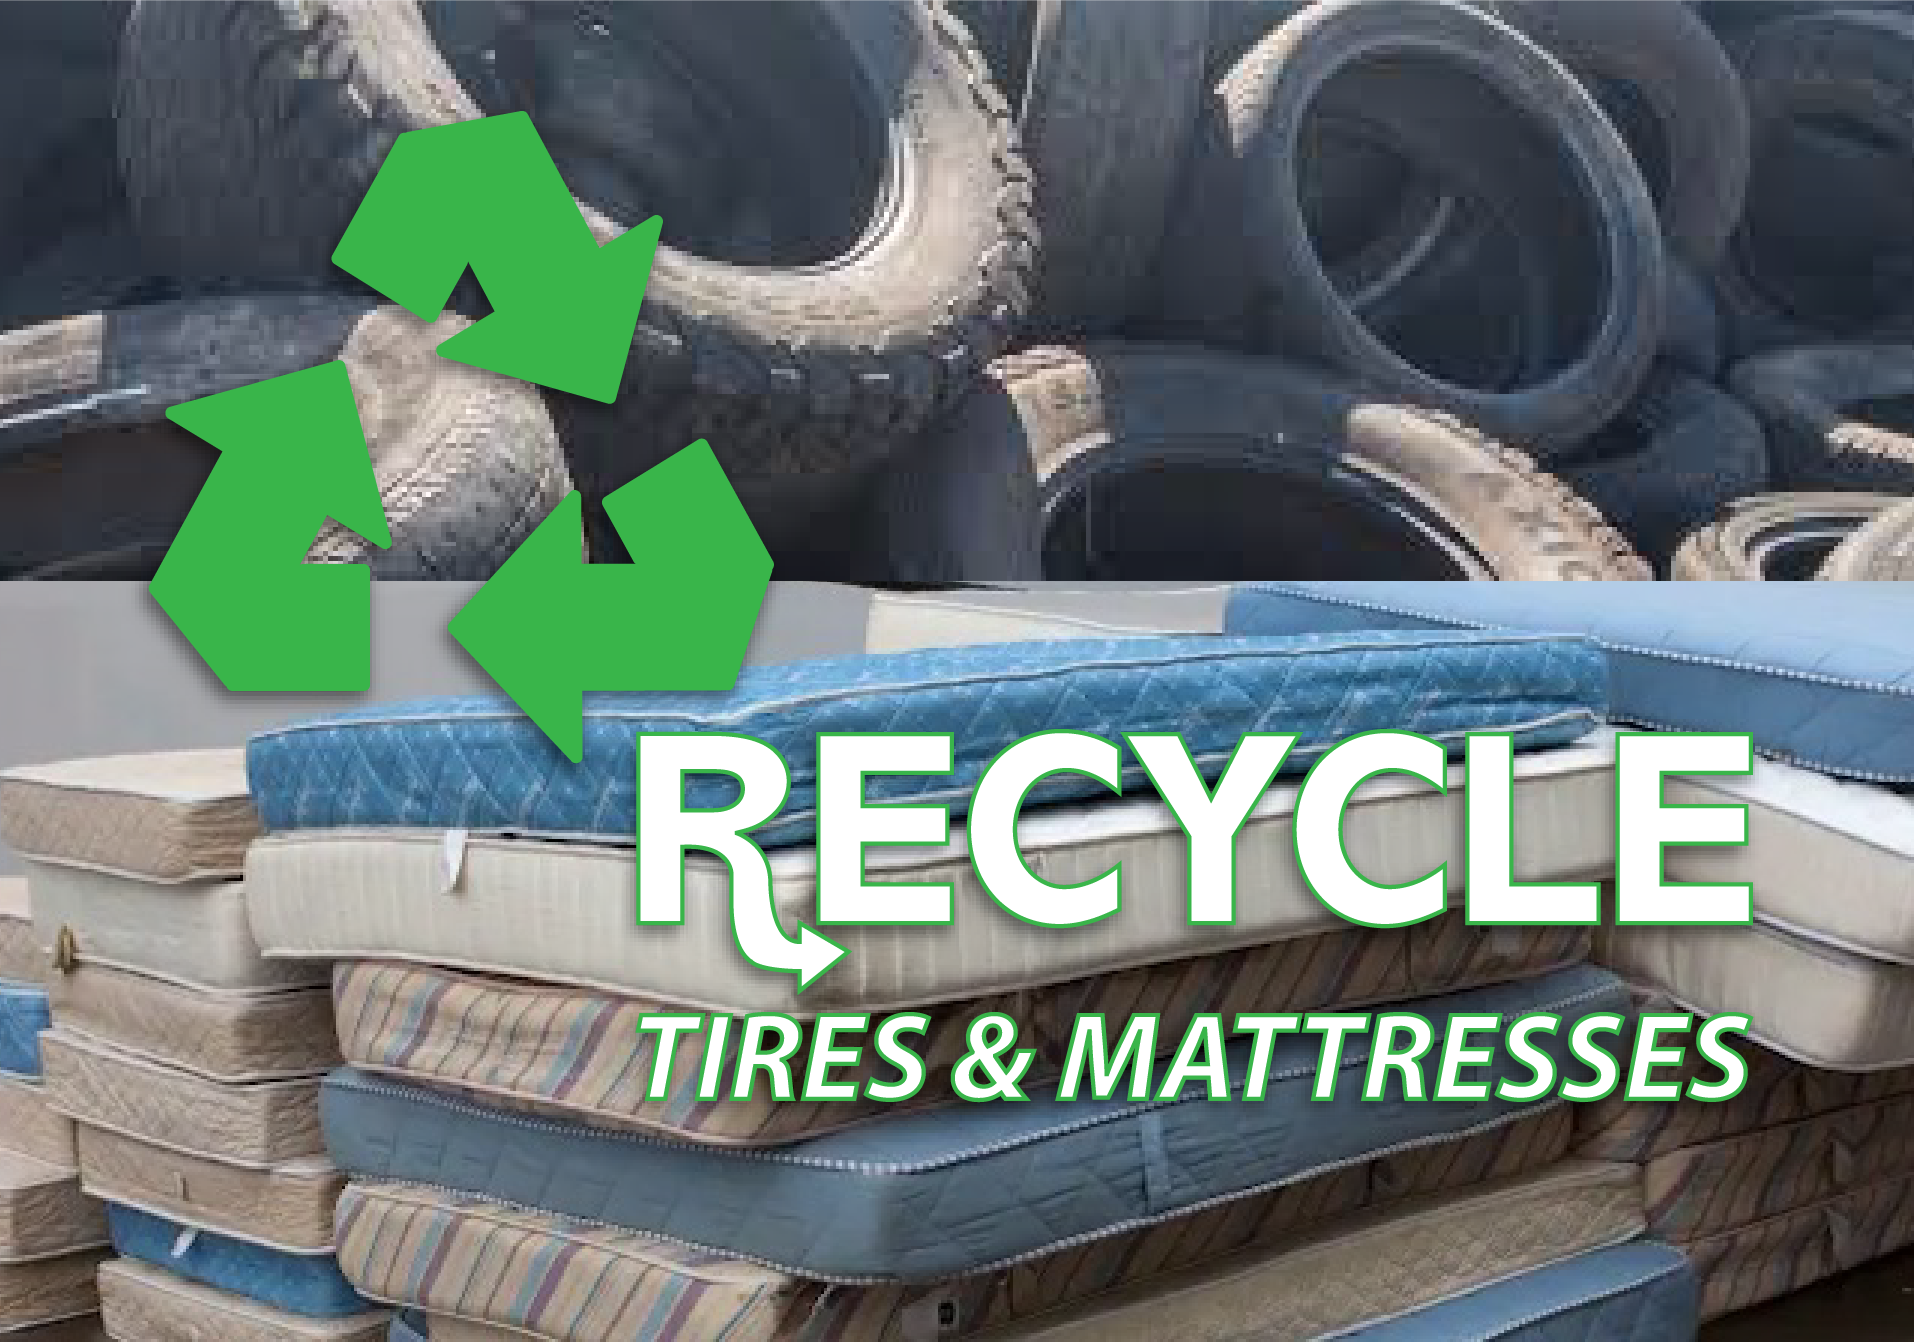 recycle scrap tire and mattress graphic